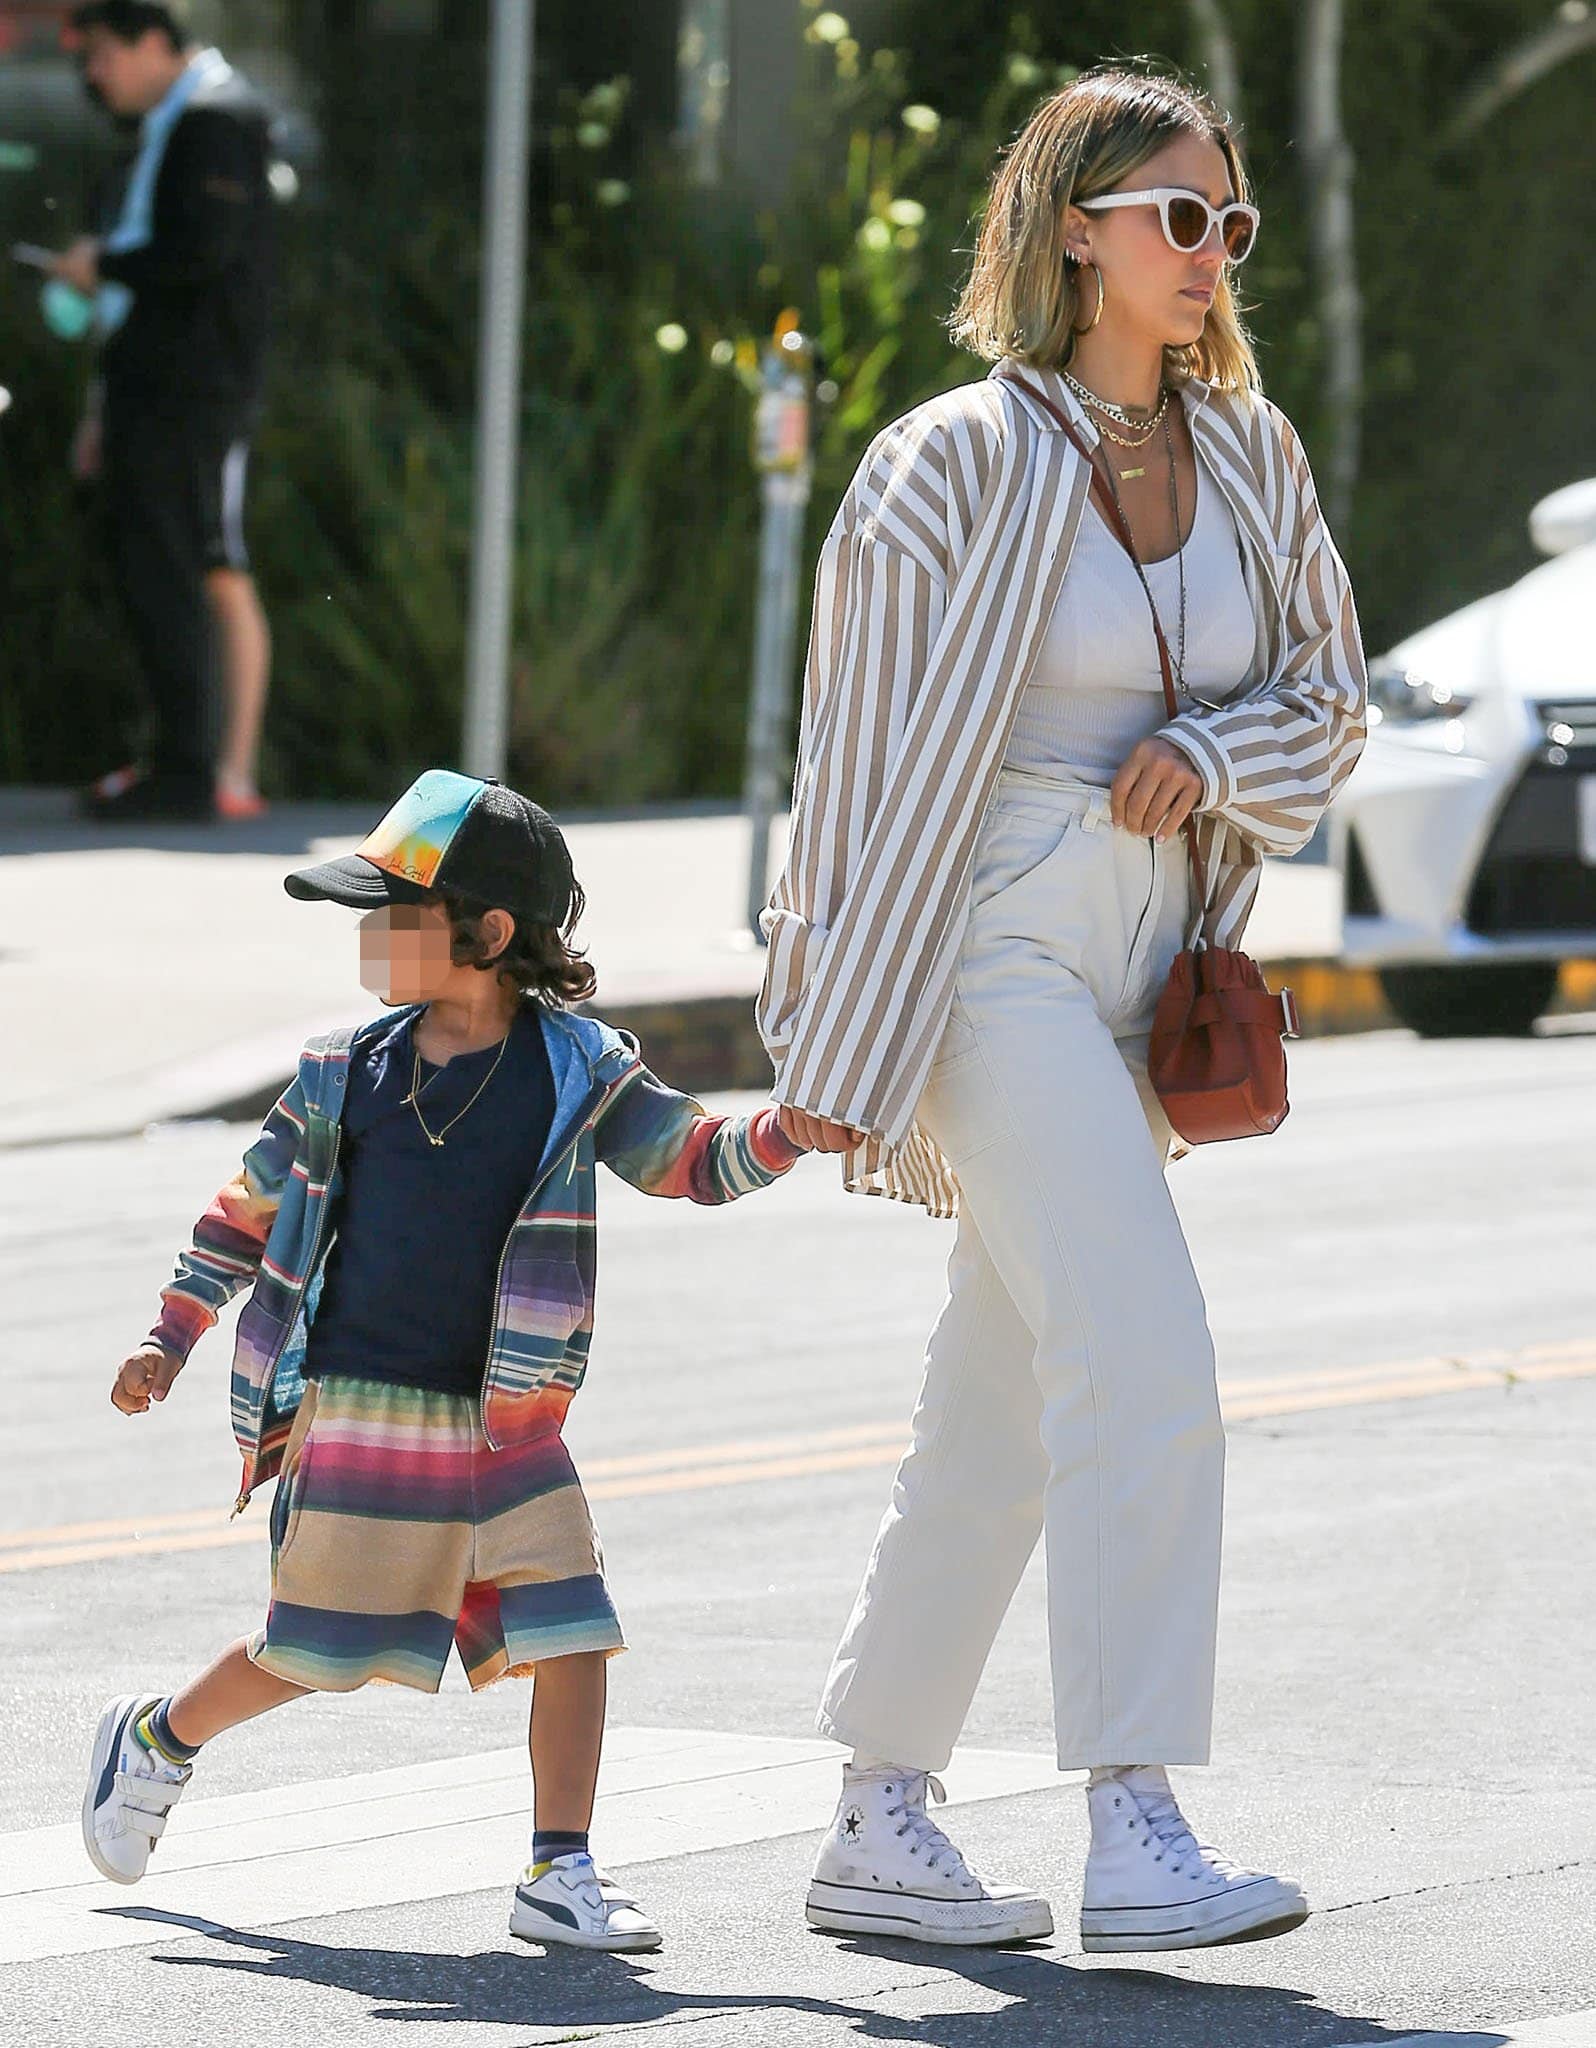 Jessica Alba heads to lunch with son Hayes in Los Angeles on March 12, 2022